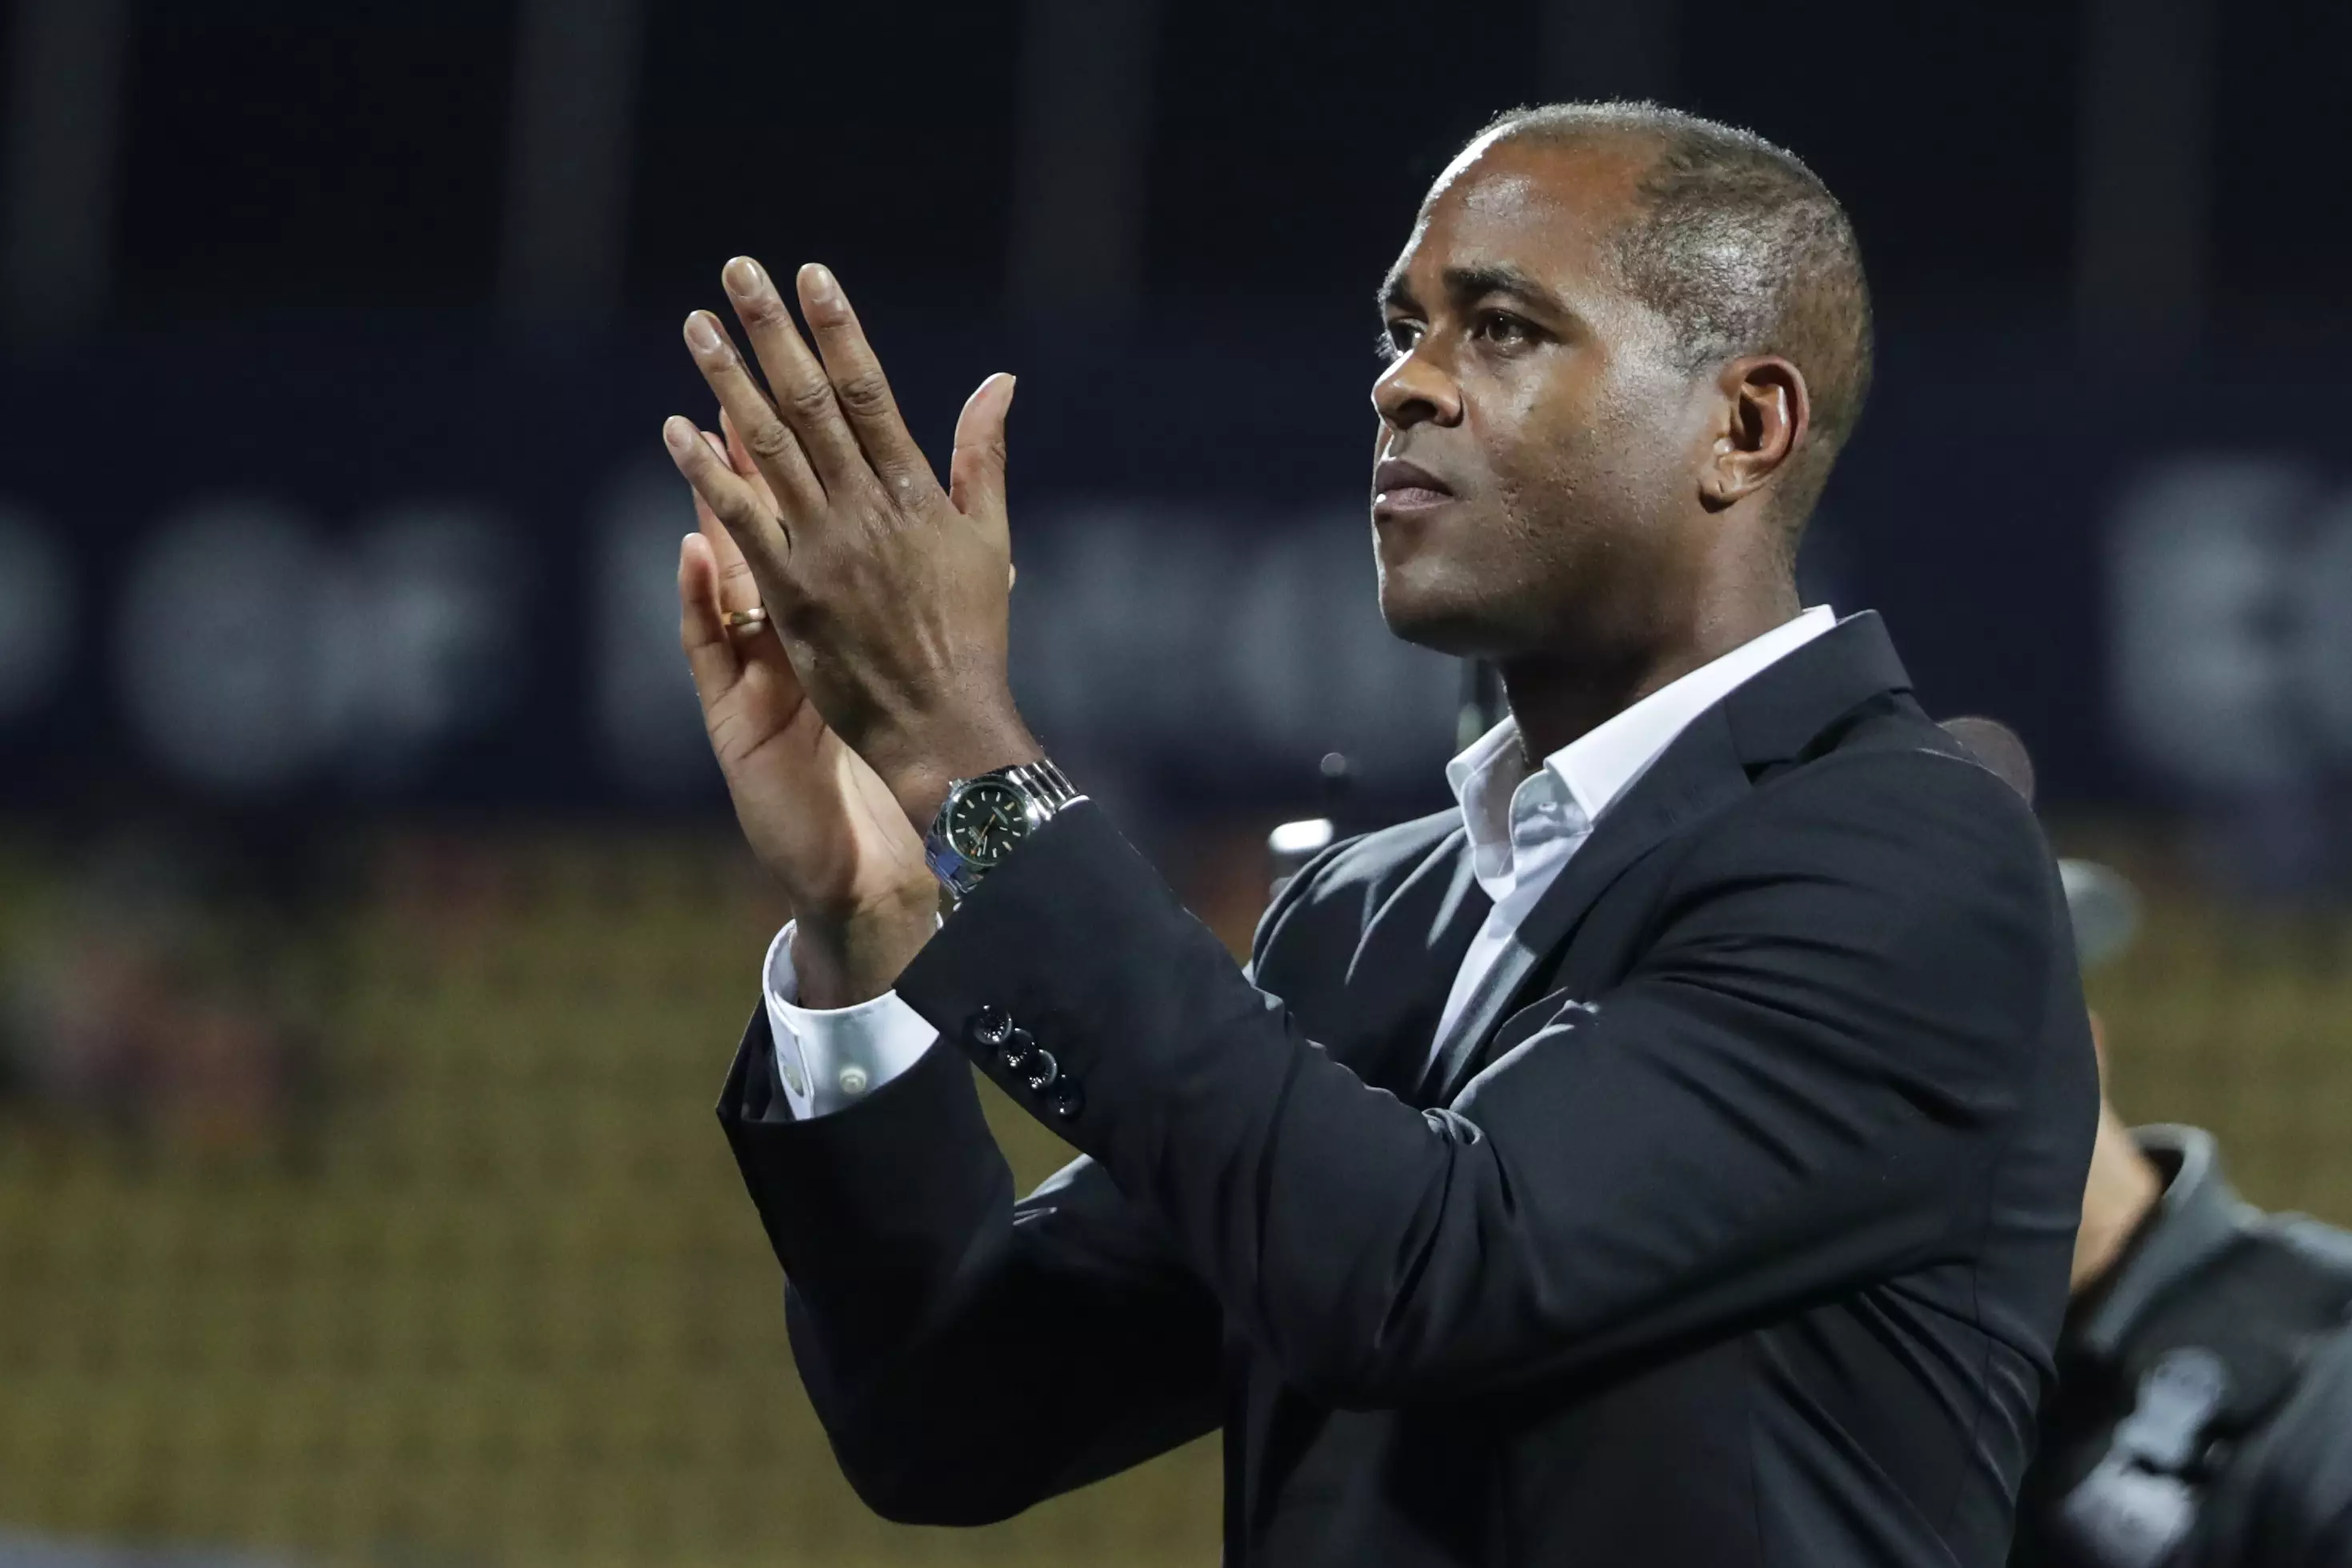 Kluivert is back at the club. Image: PA Images